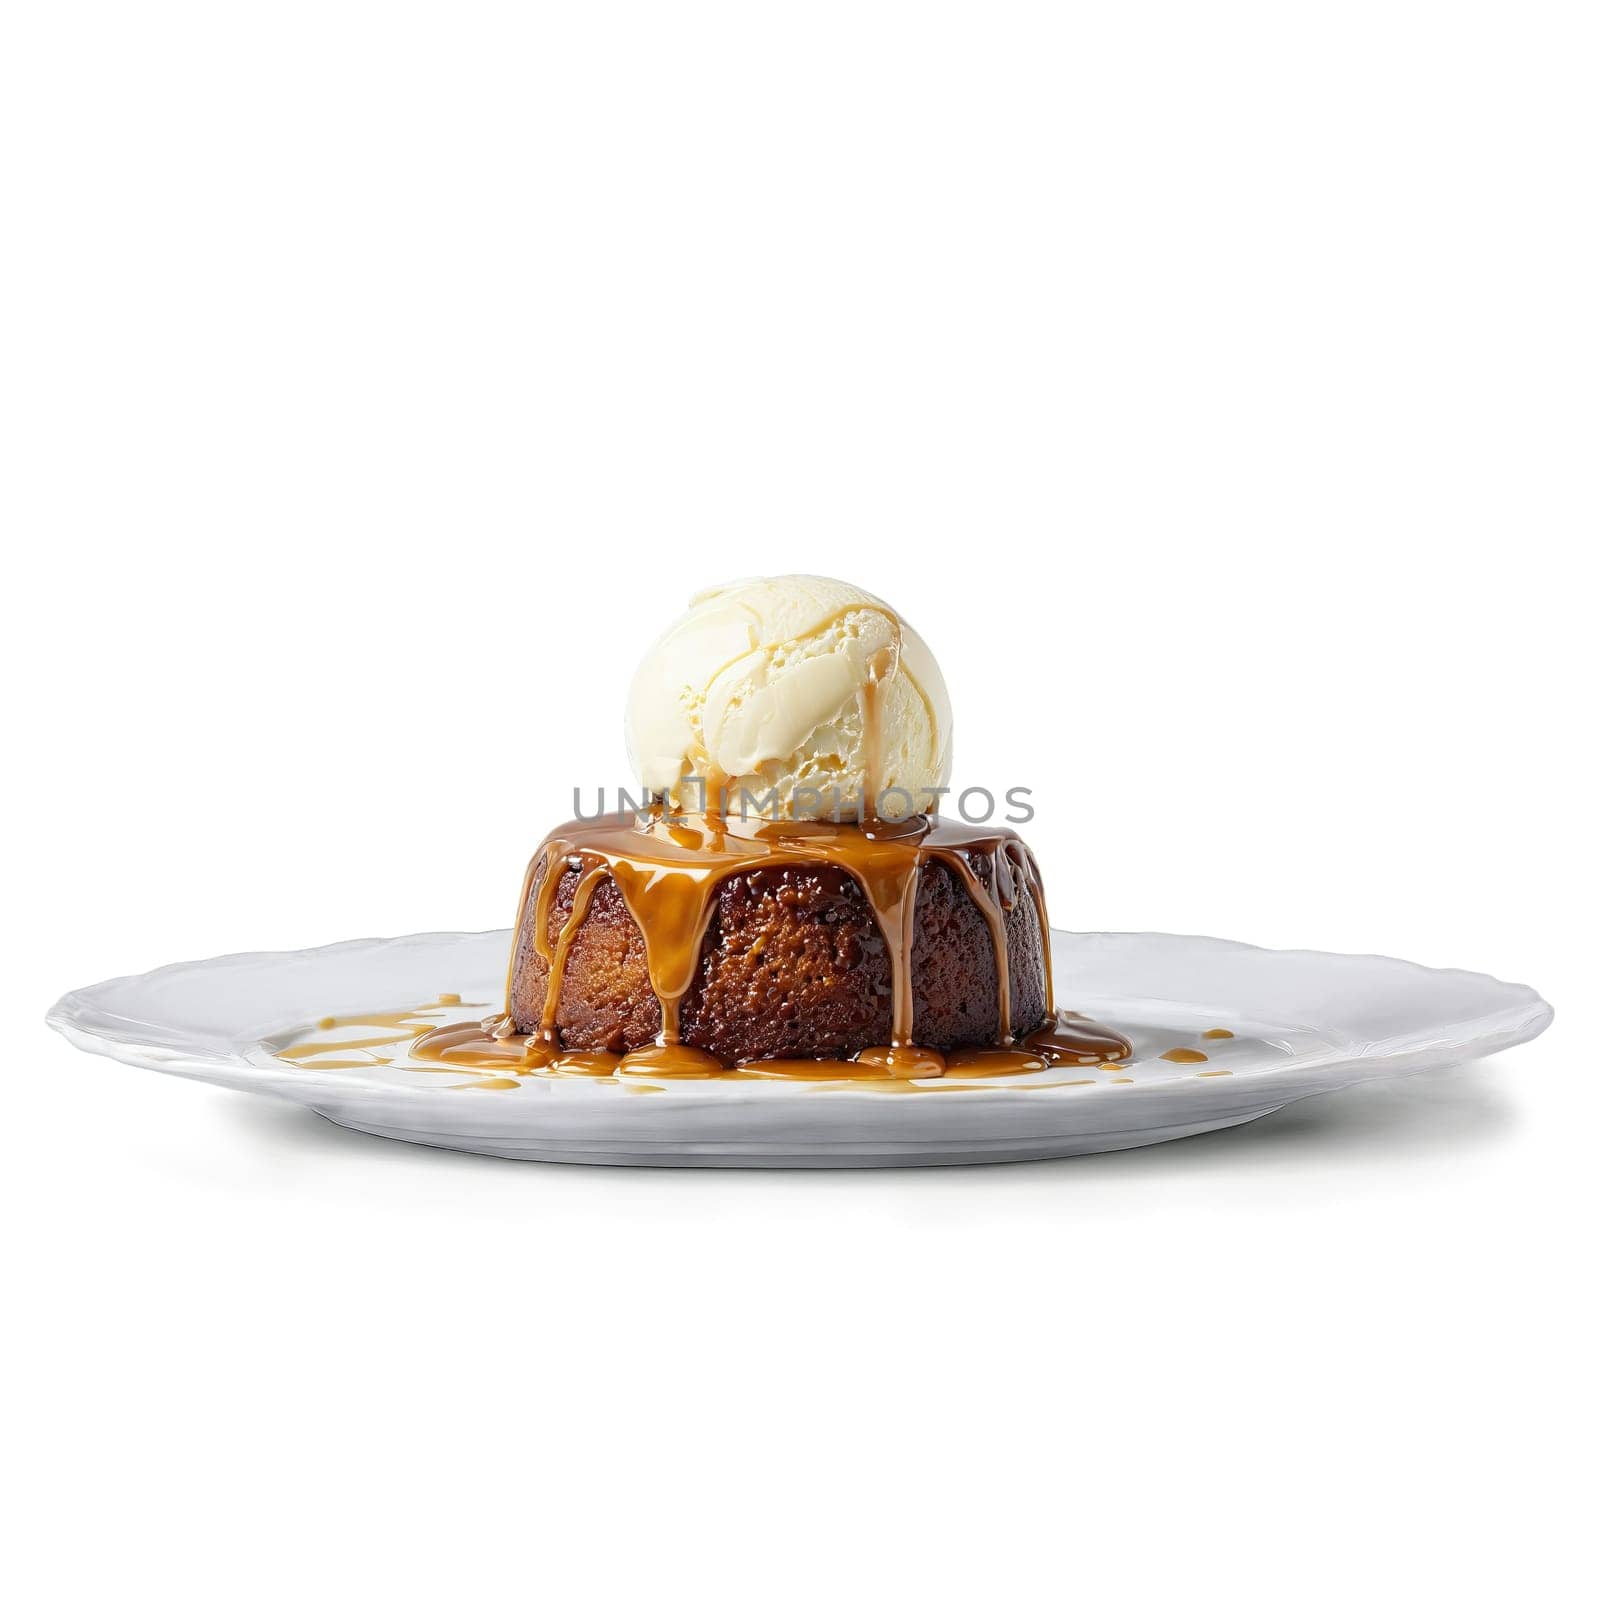 Sticky toffee pudding with caramel sauce and vanilla ice cream melting Food and culinary concept. Food isolated on transparent background.